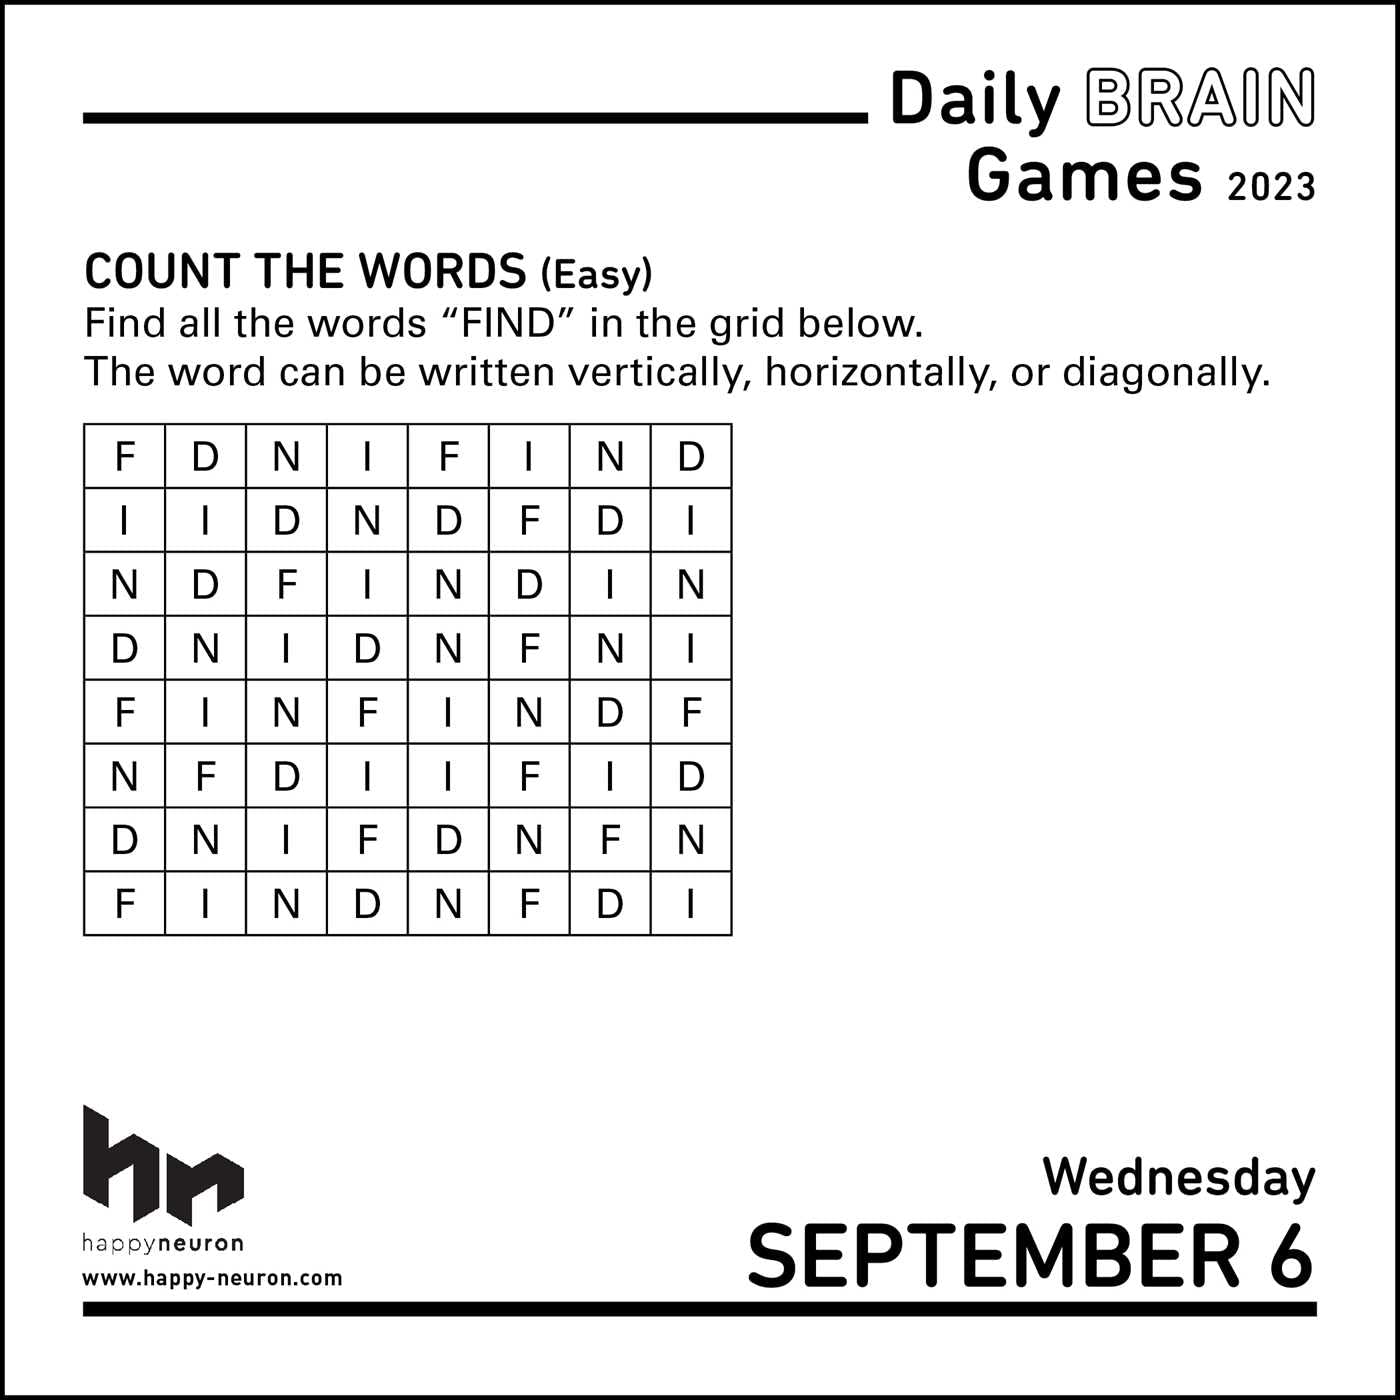 Daily Brain Games 2023 Day-to-Day Calendar